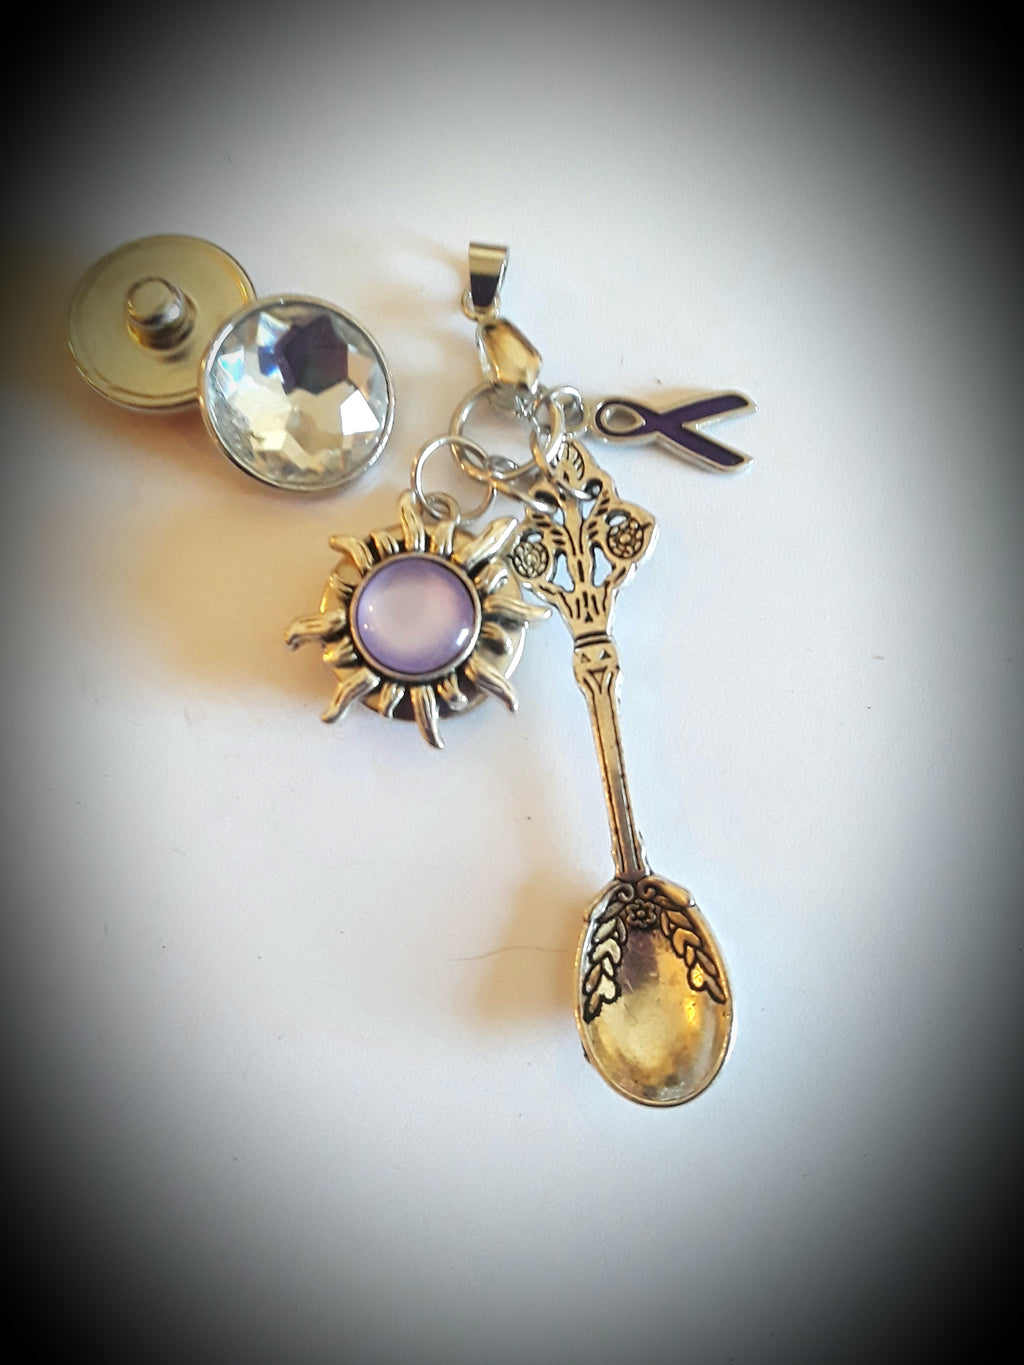 18mm noosa base pendant with spoon, butterfly, and purple awareness ribbon